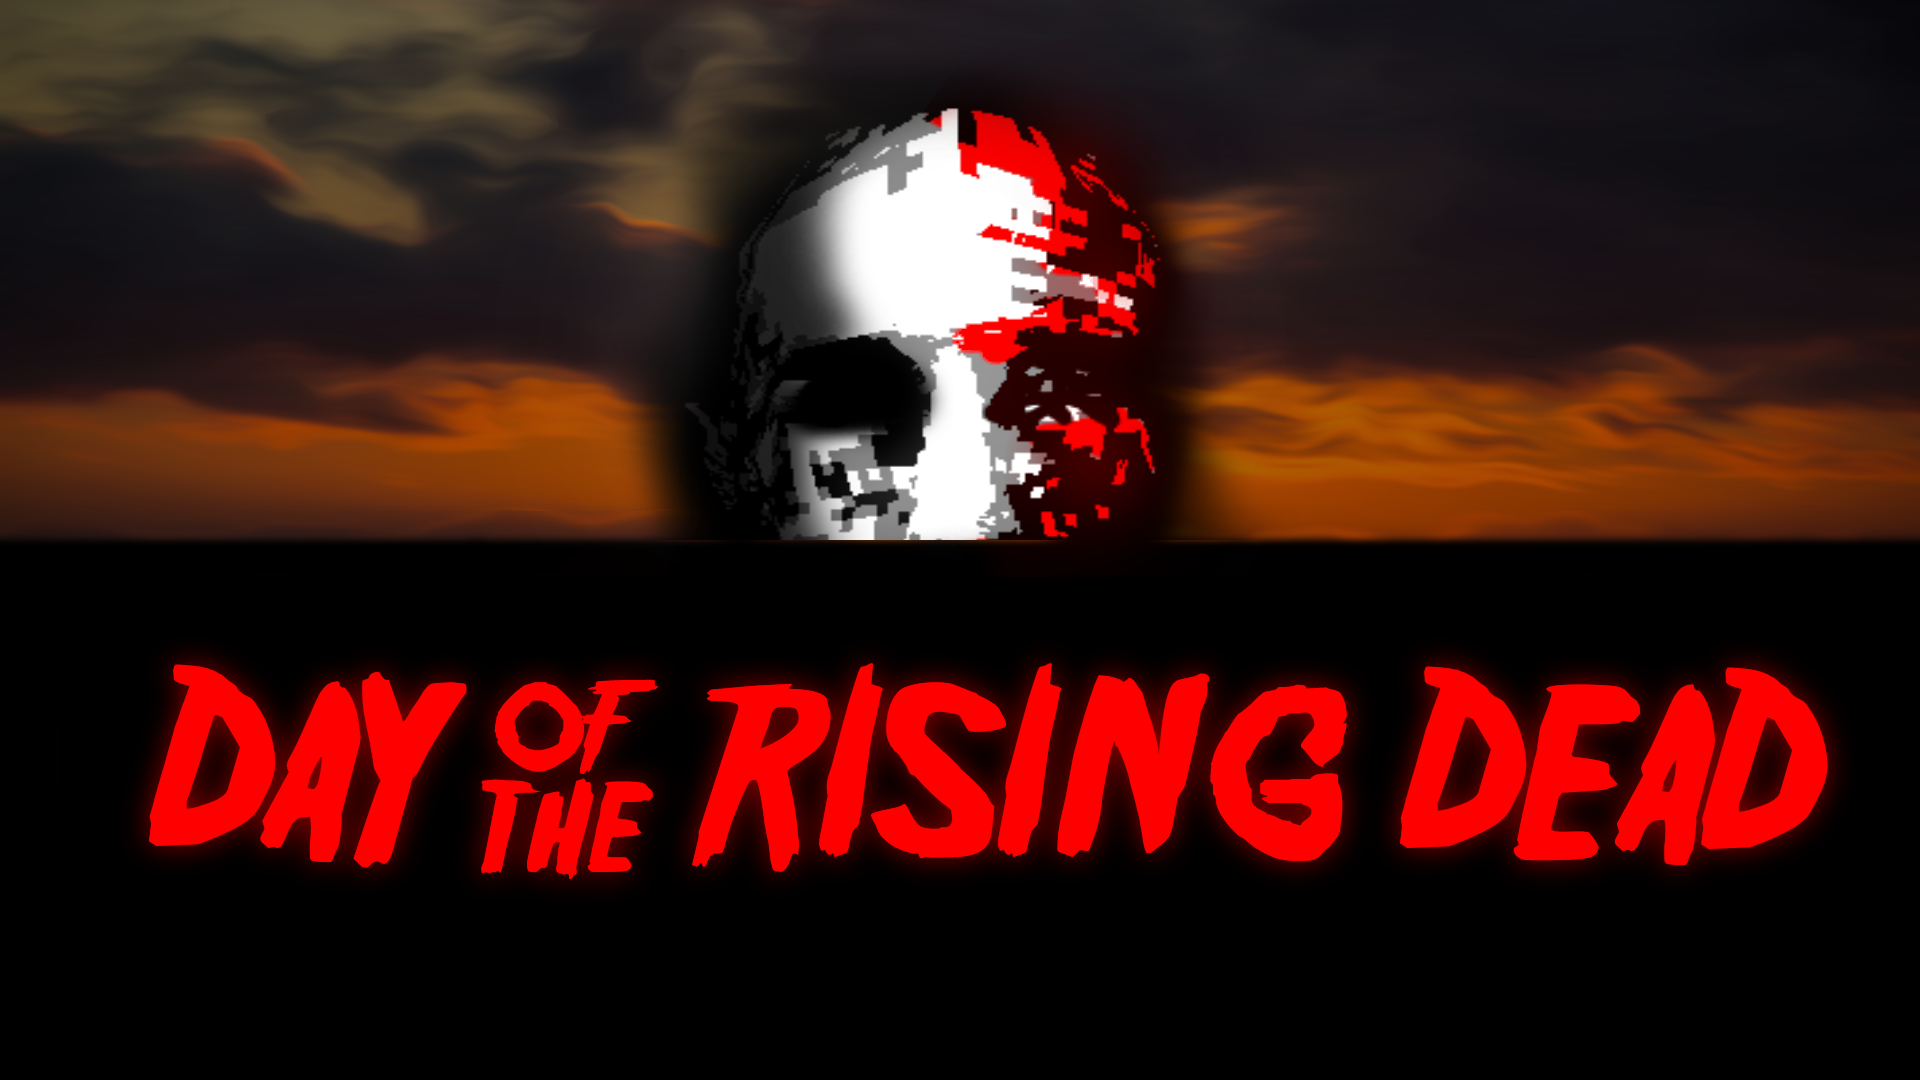 Day of the Rising Dead TRAILER 2021 news Indie DB